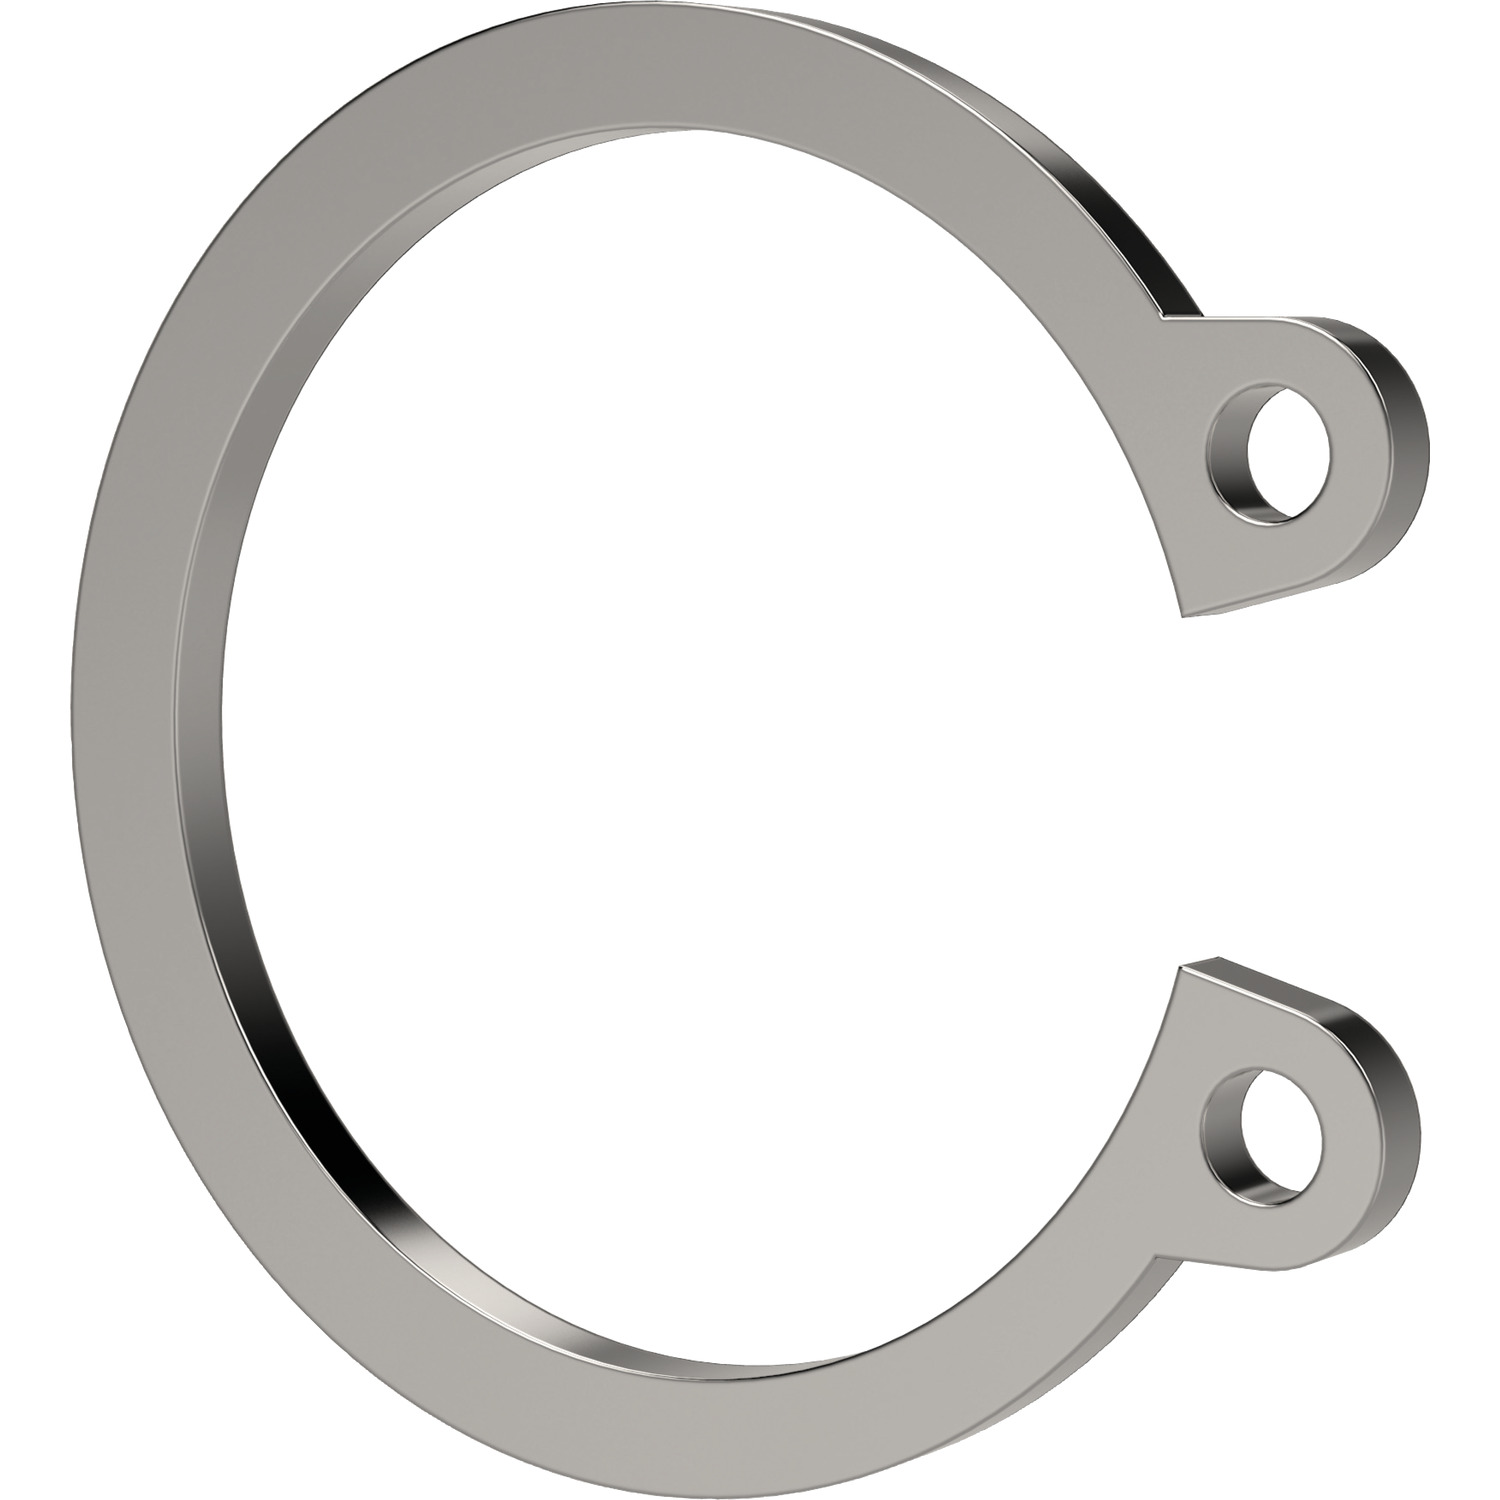 Clevis Circlips